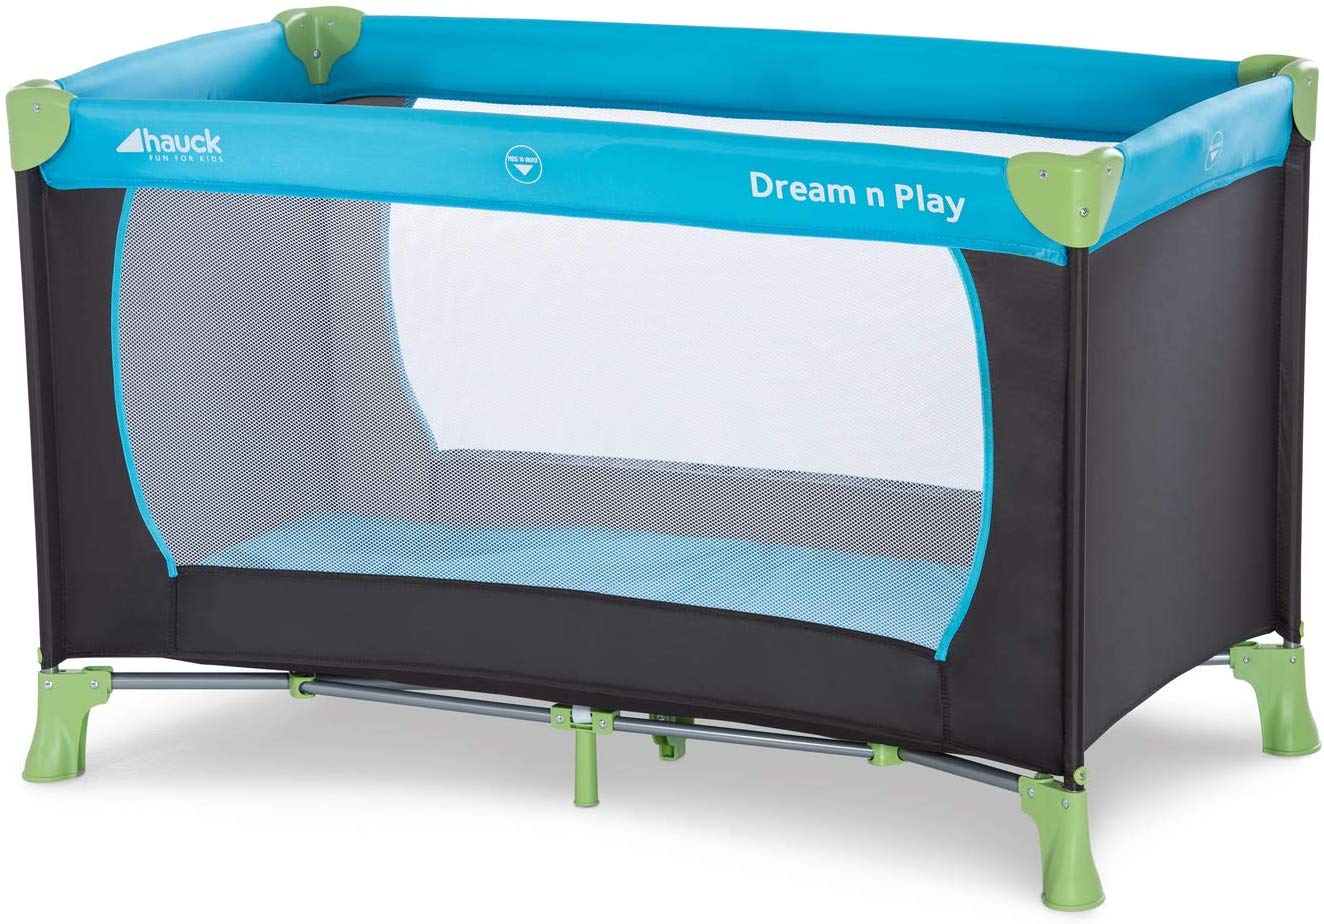 Angelcare OEM Hauck Dream’n Play, Travel Cot 120 x 60 cm from Birth to 15 kg, 3-Part Travel Bed with Folding Mattress and Carry Bag, Tilt-Resistant, Waterblue